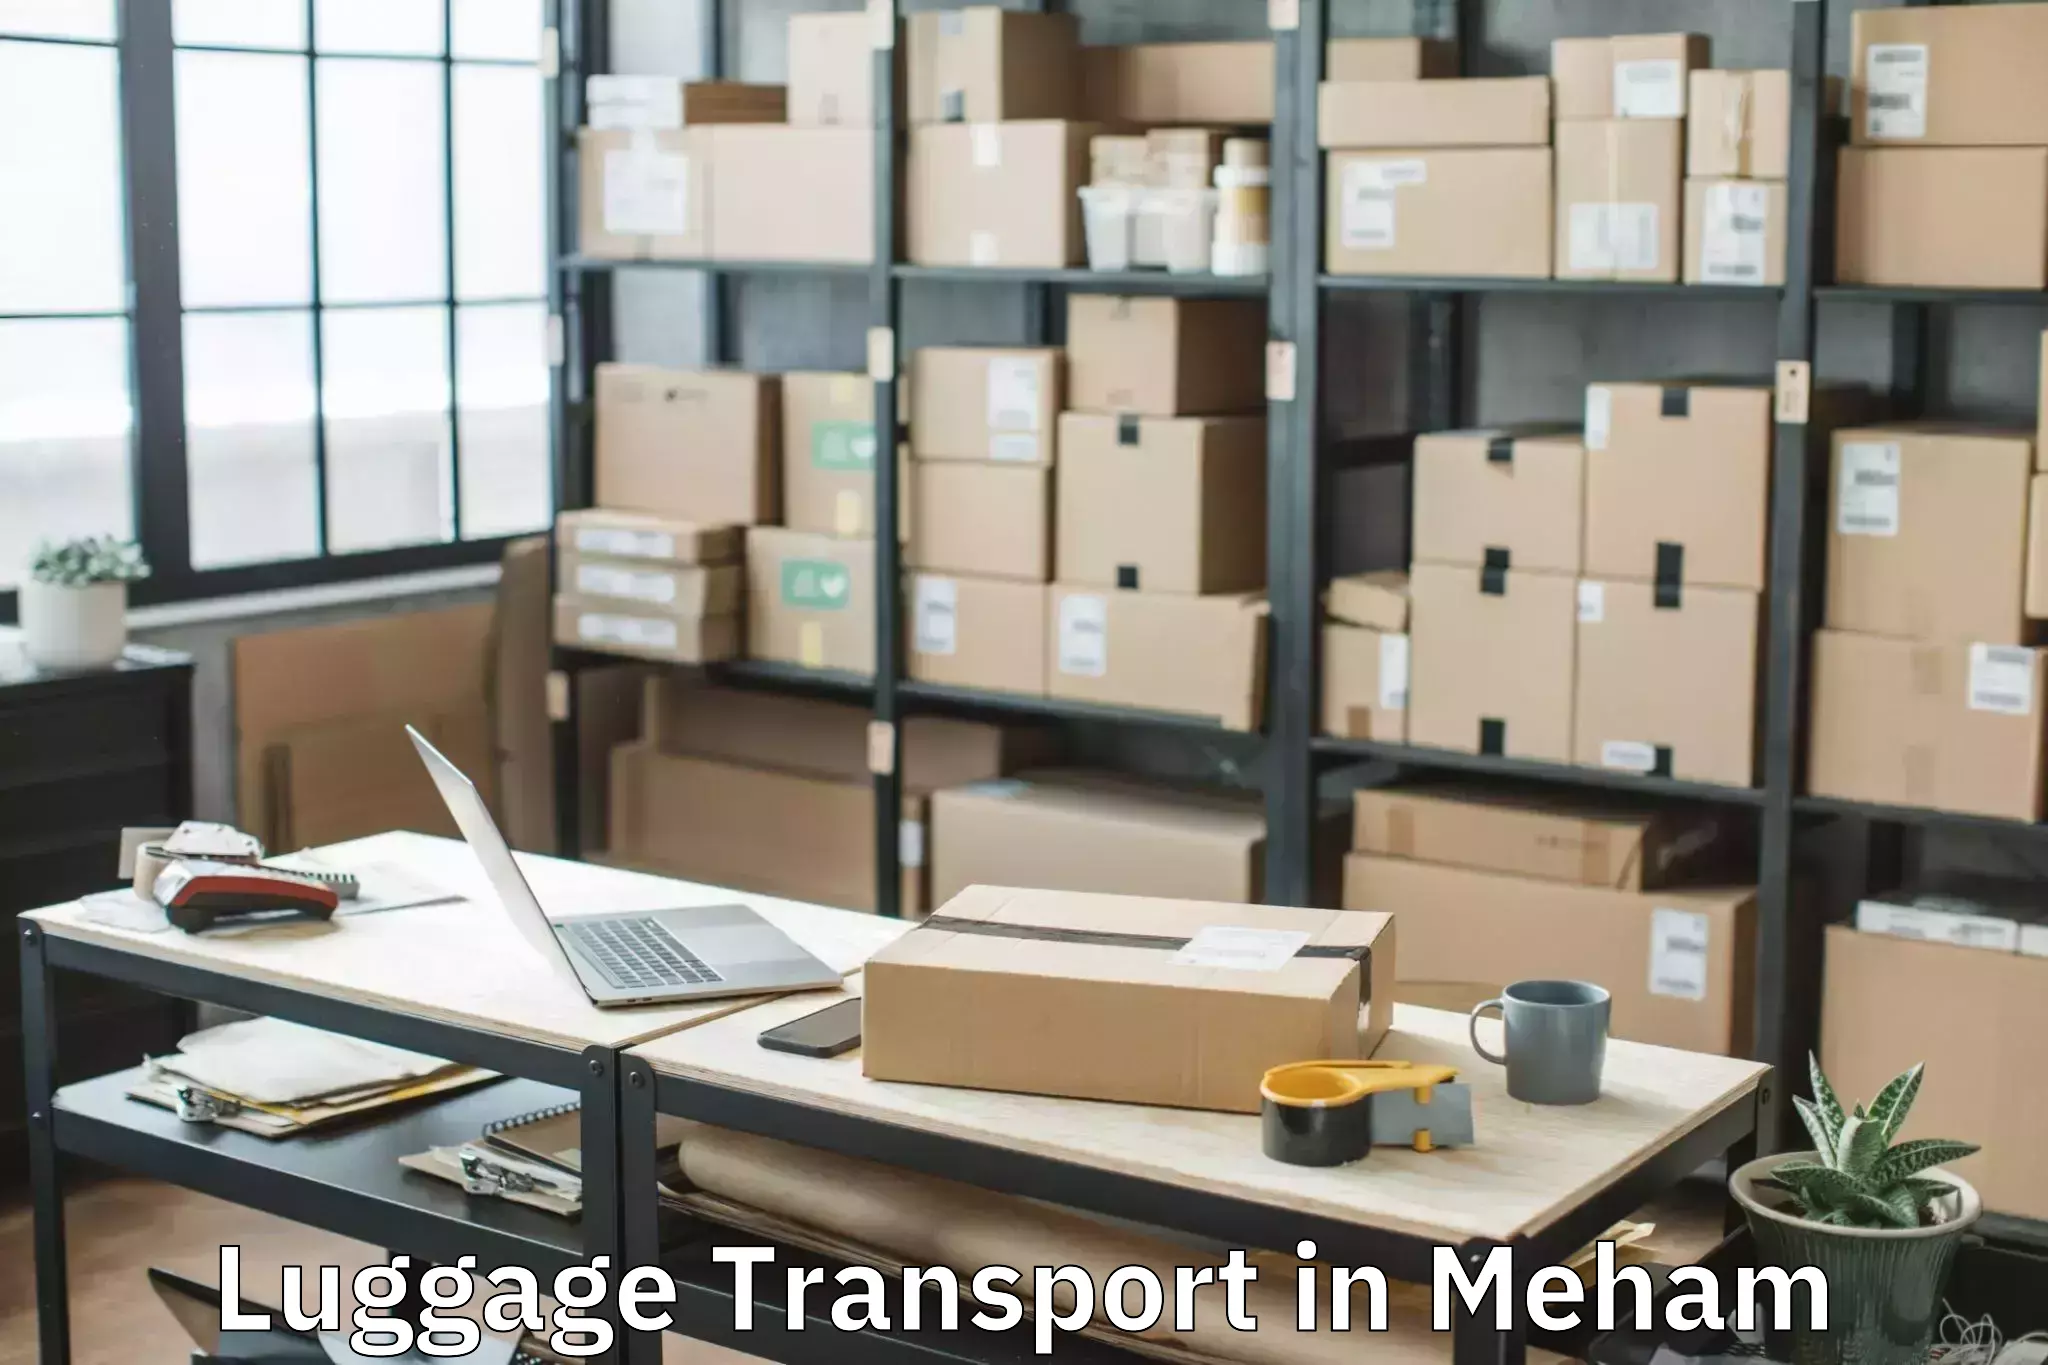 Luggage shipping trends in Meham